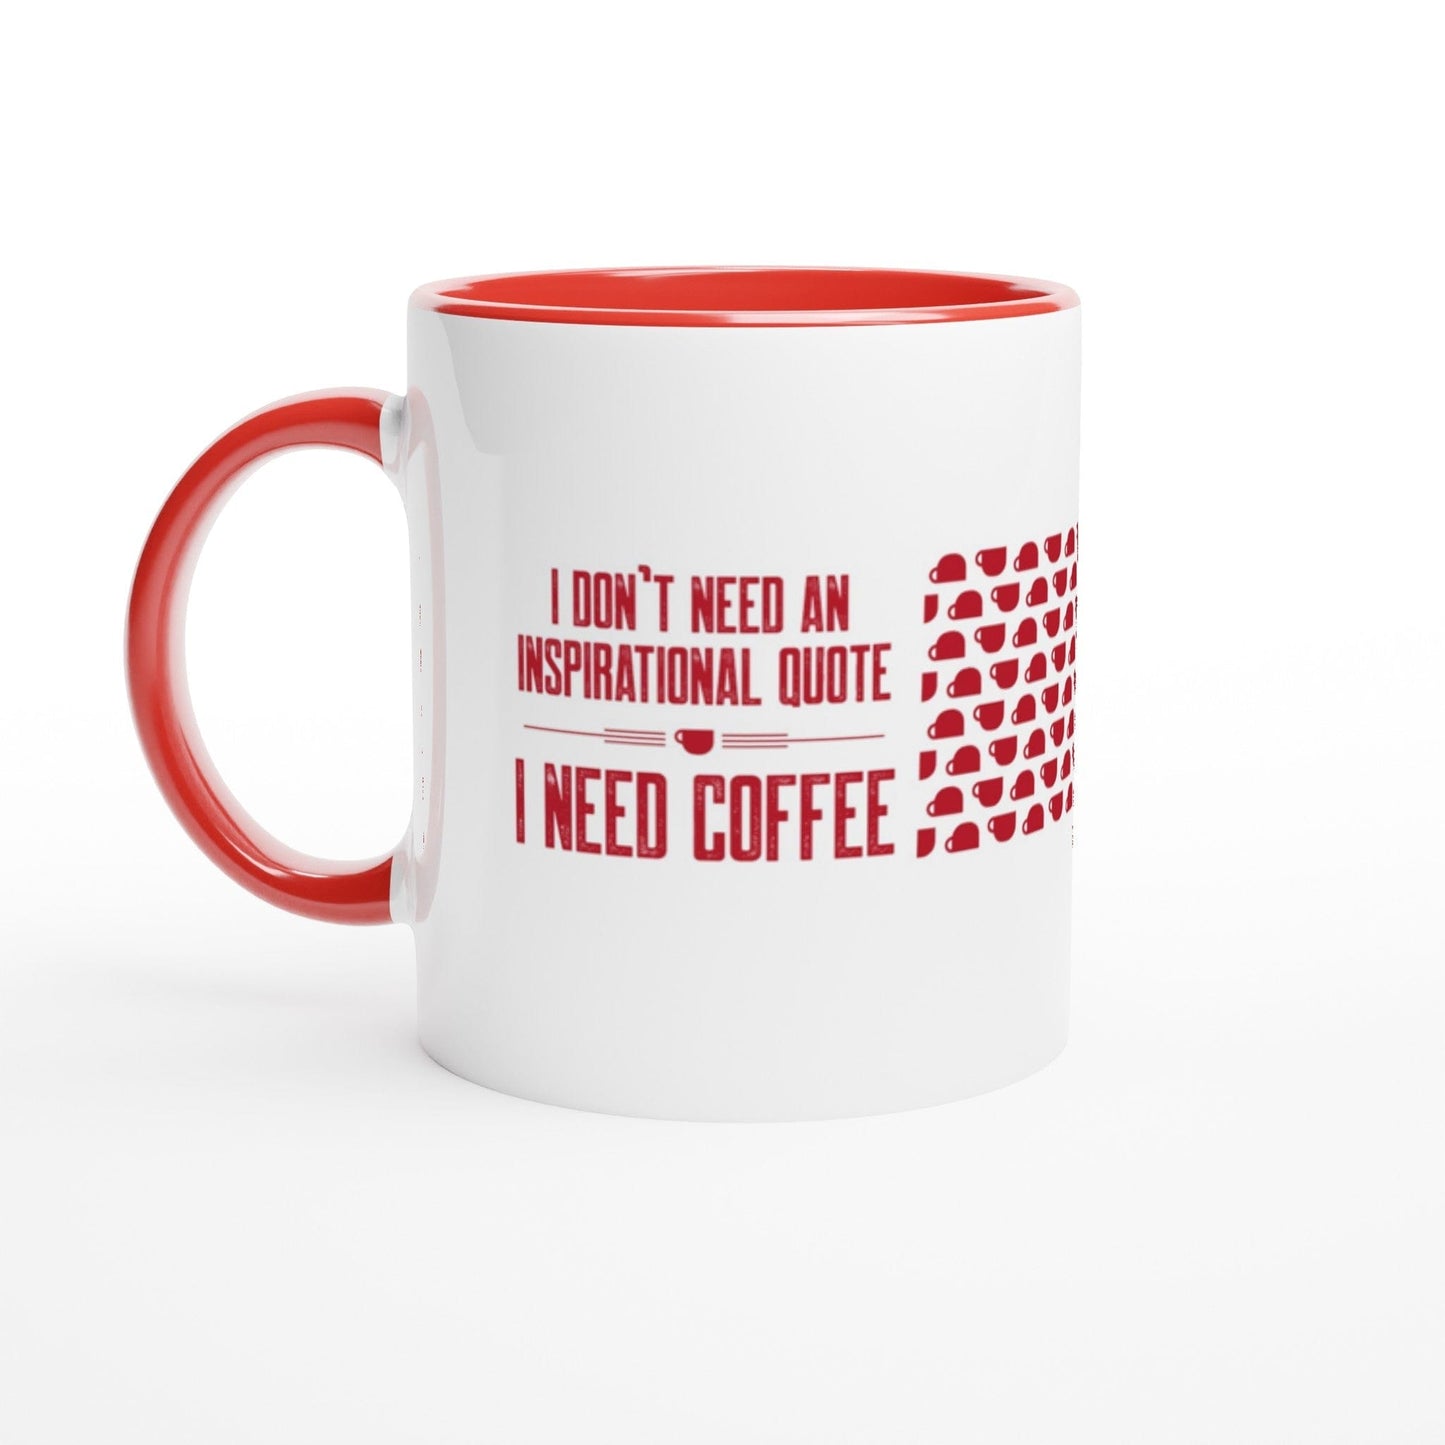 Good Bean Gifts "Coffee Not Quotes" (Coffee Bean accent) White 11oz Ceramic Red